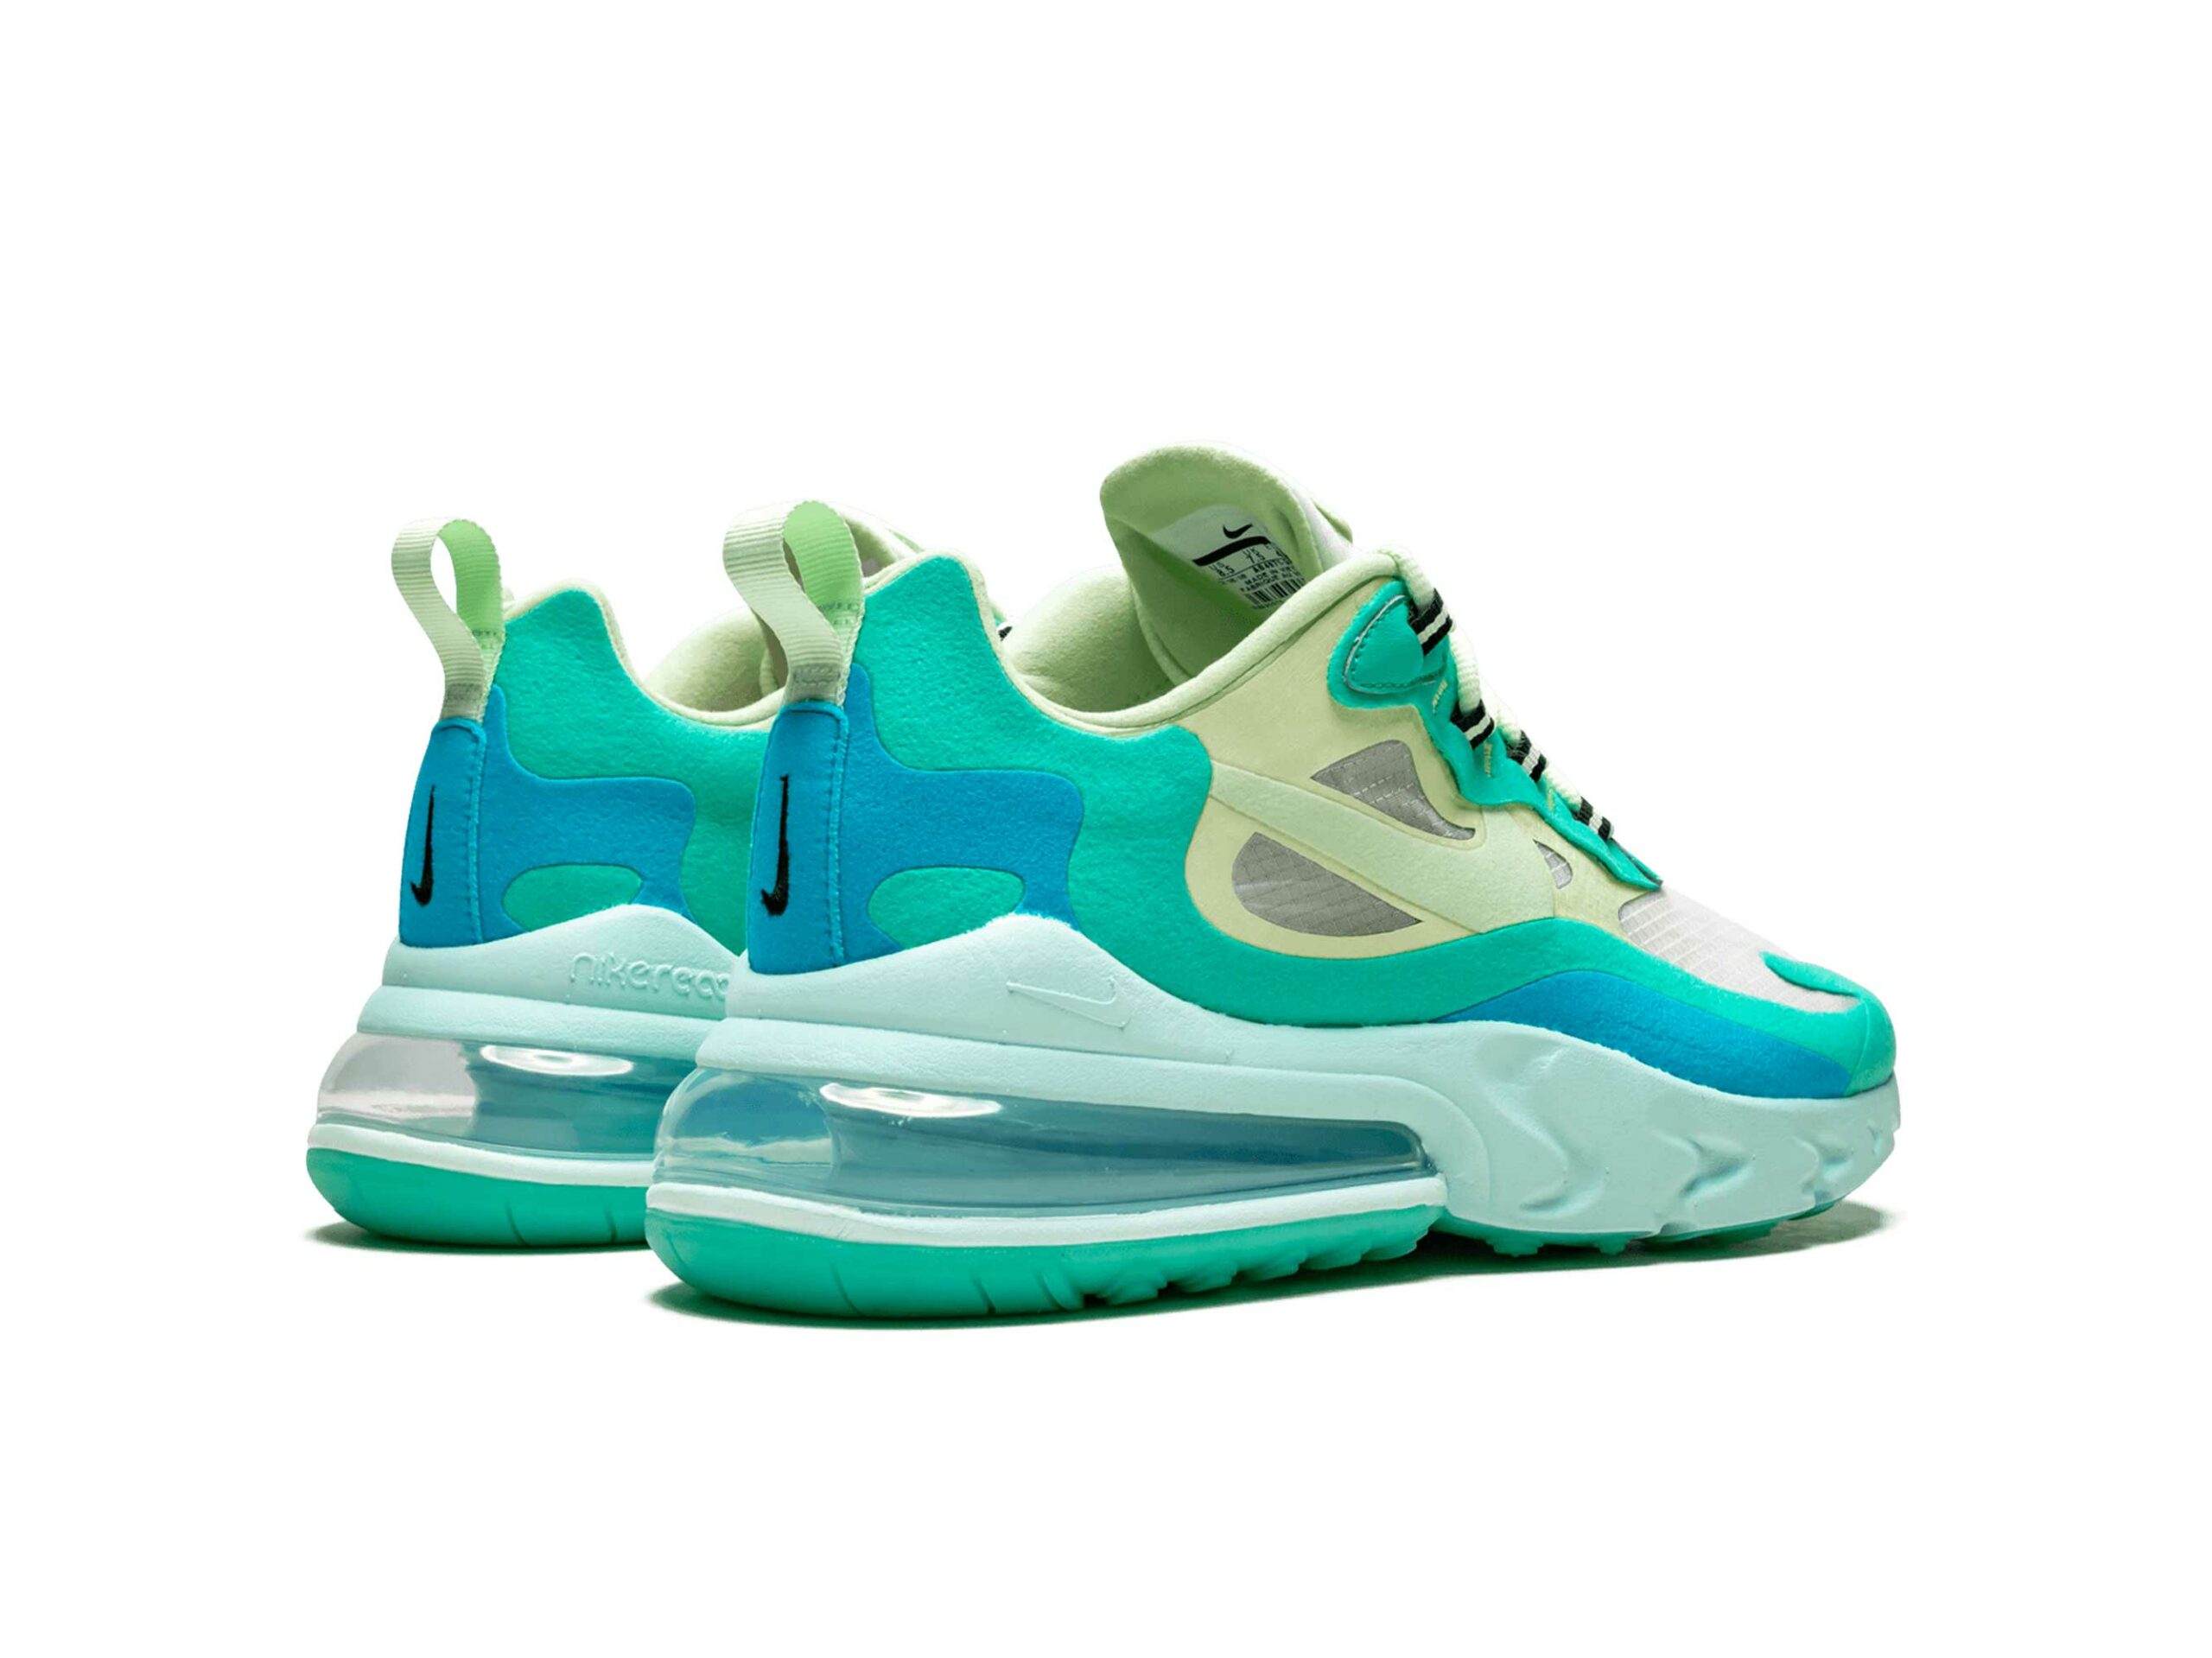 nike air max 270 react frosted spruce ao4971_301 купить